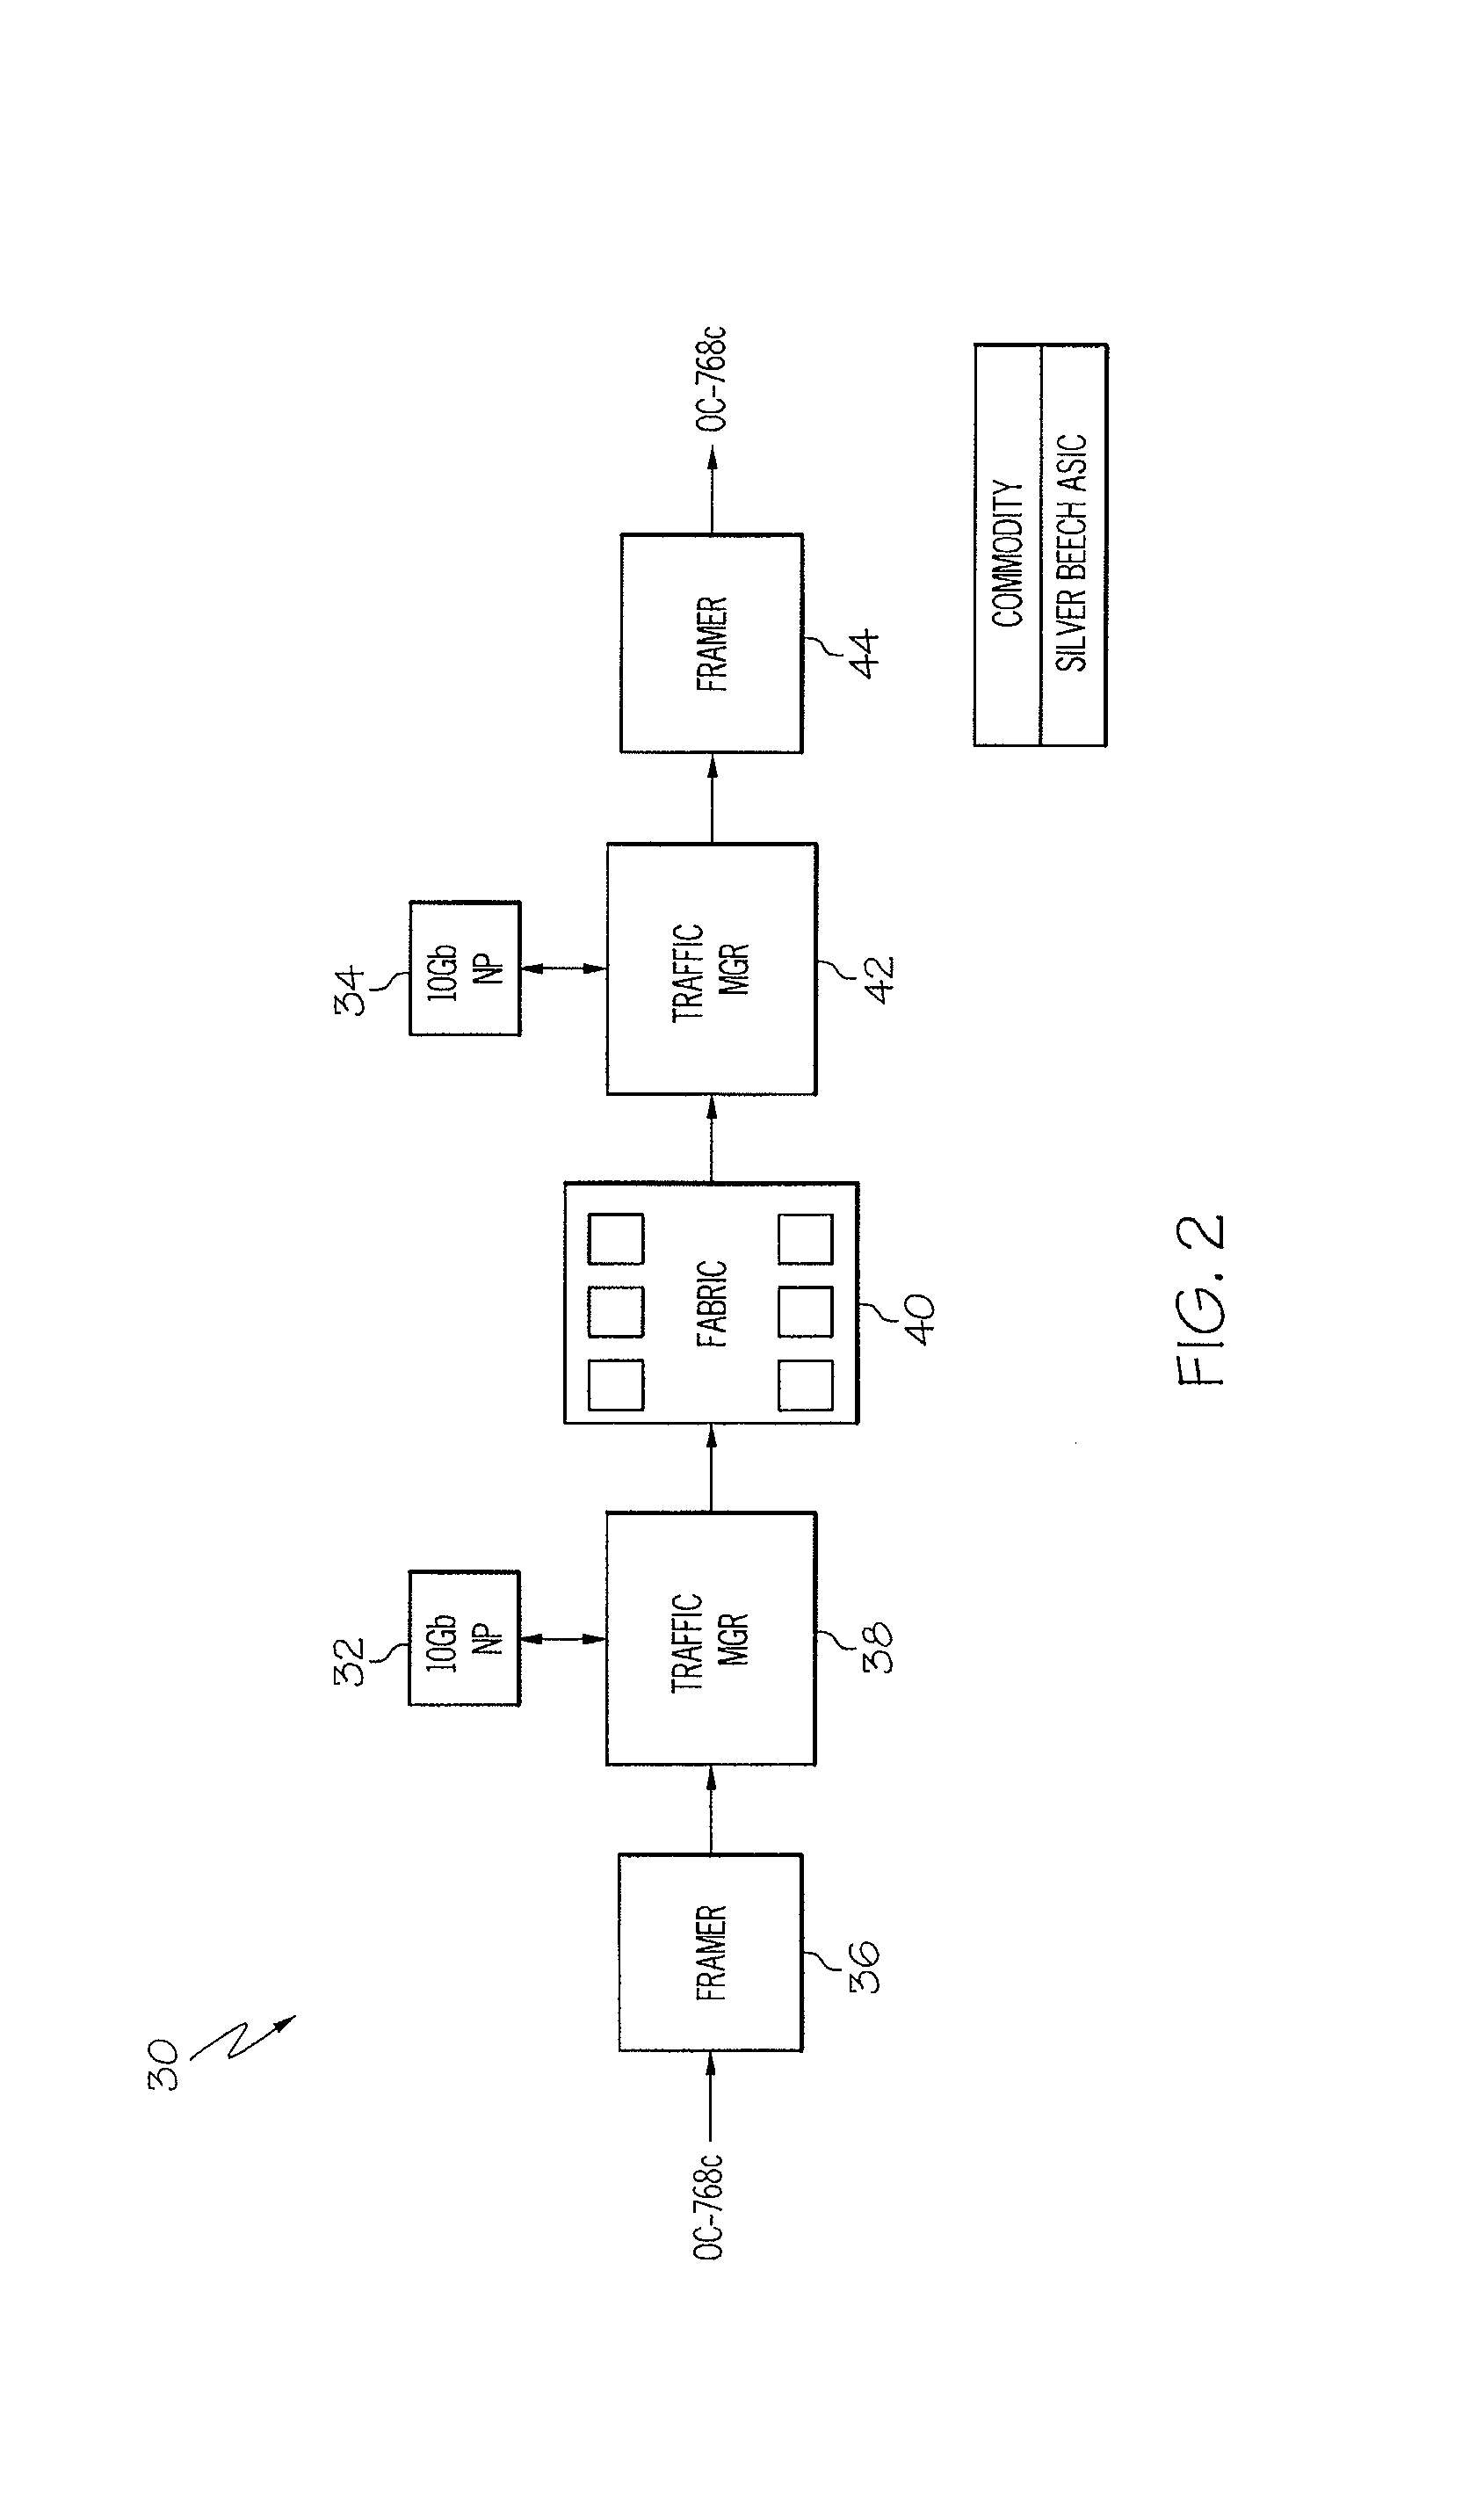 System and method for transferring data on a network using a single route optimizer to define an explicit route and transfer the information related to the explicit route to a plurality of routers and a plurality of optimized routers on the network